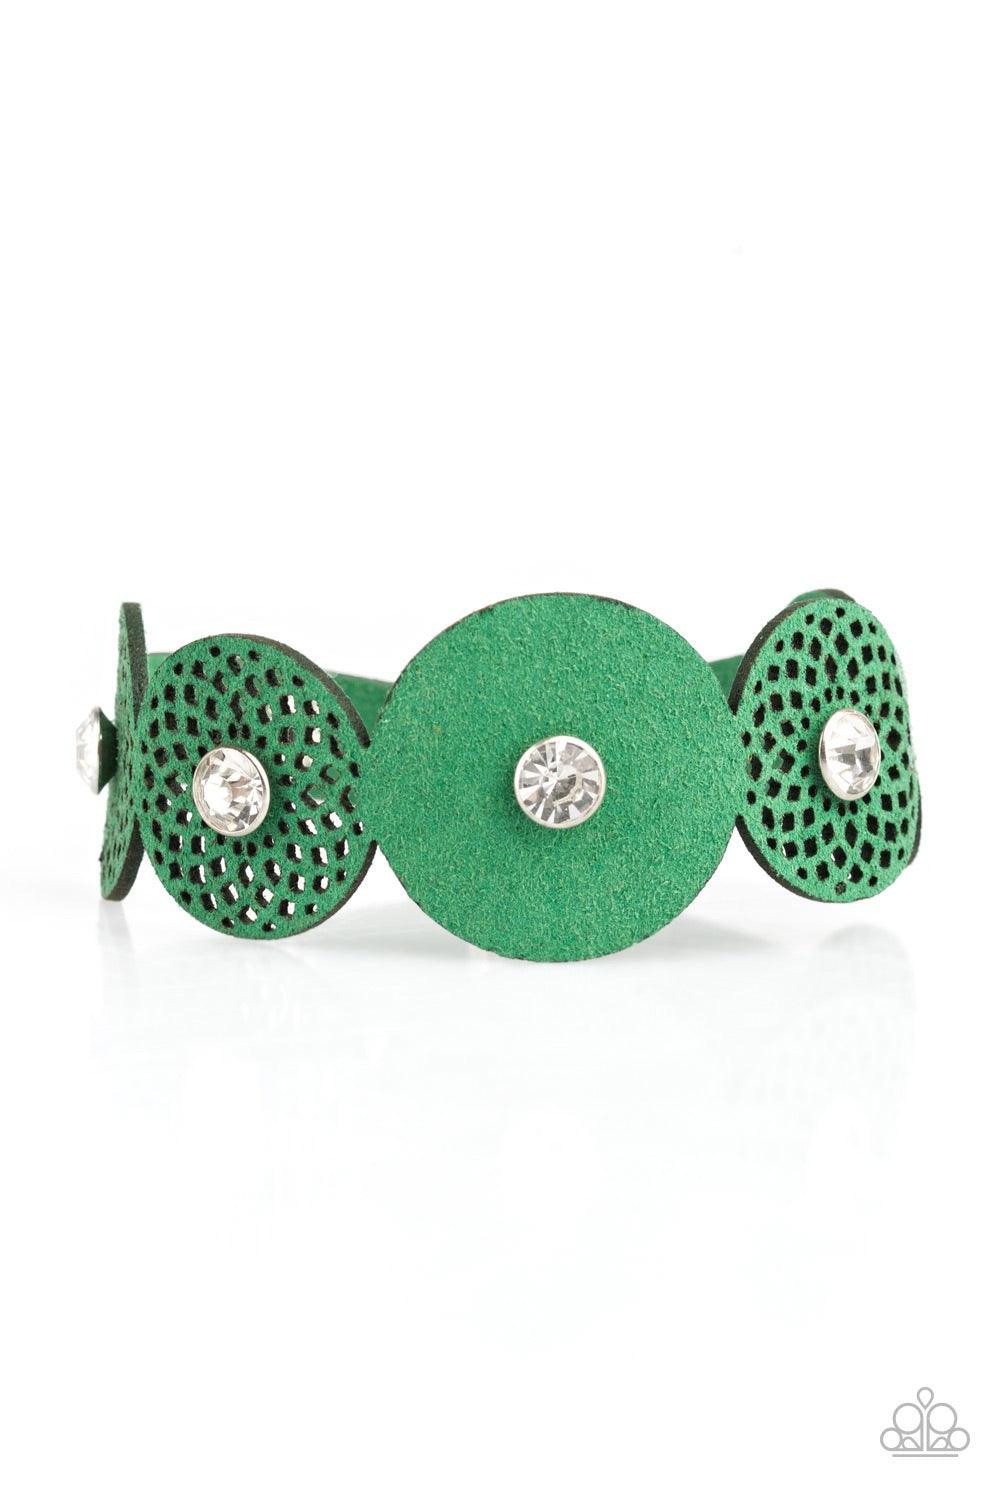 Paparazzi Accessories Poppin Popstar - Green Dotted with white rhinestone centers, round green suede frames join across the wrist for a whimsical look. Features an adjustable snap closure. Jewelry